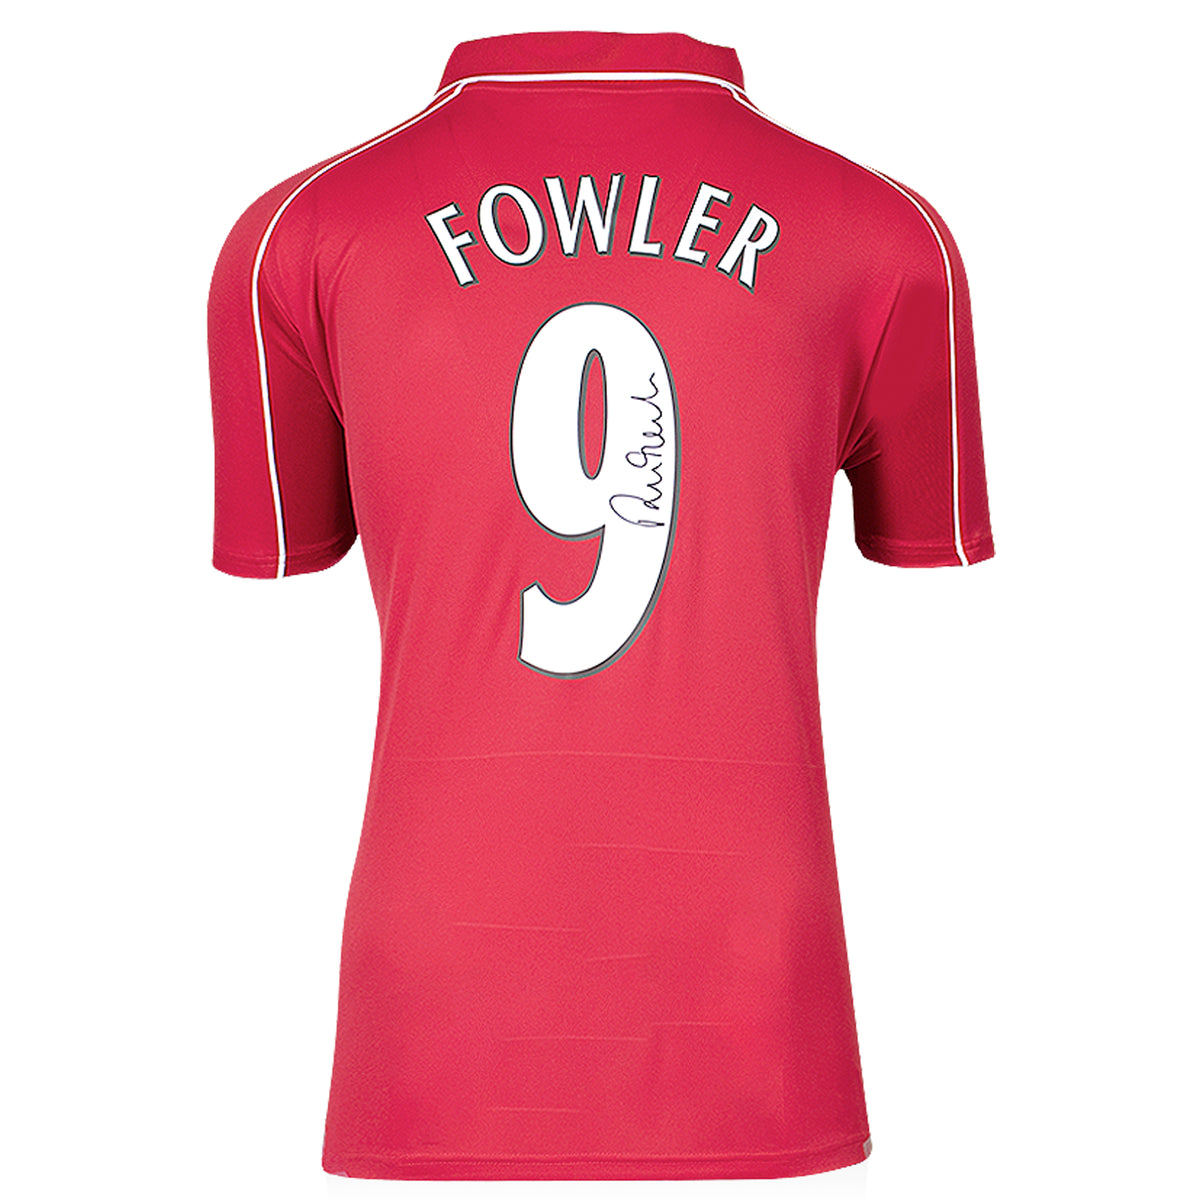 Robbie Fowler Liverpool 2000-01 Home Shirt With Back Signed